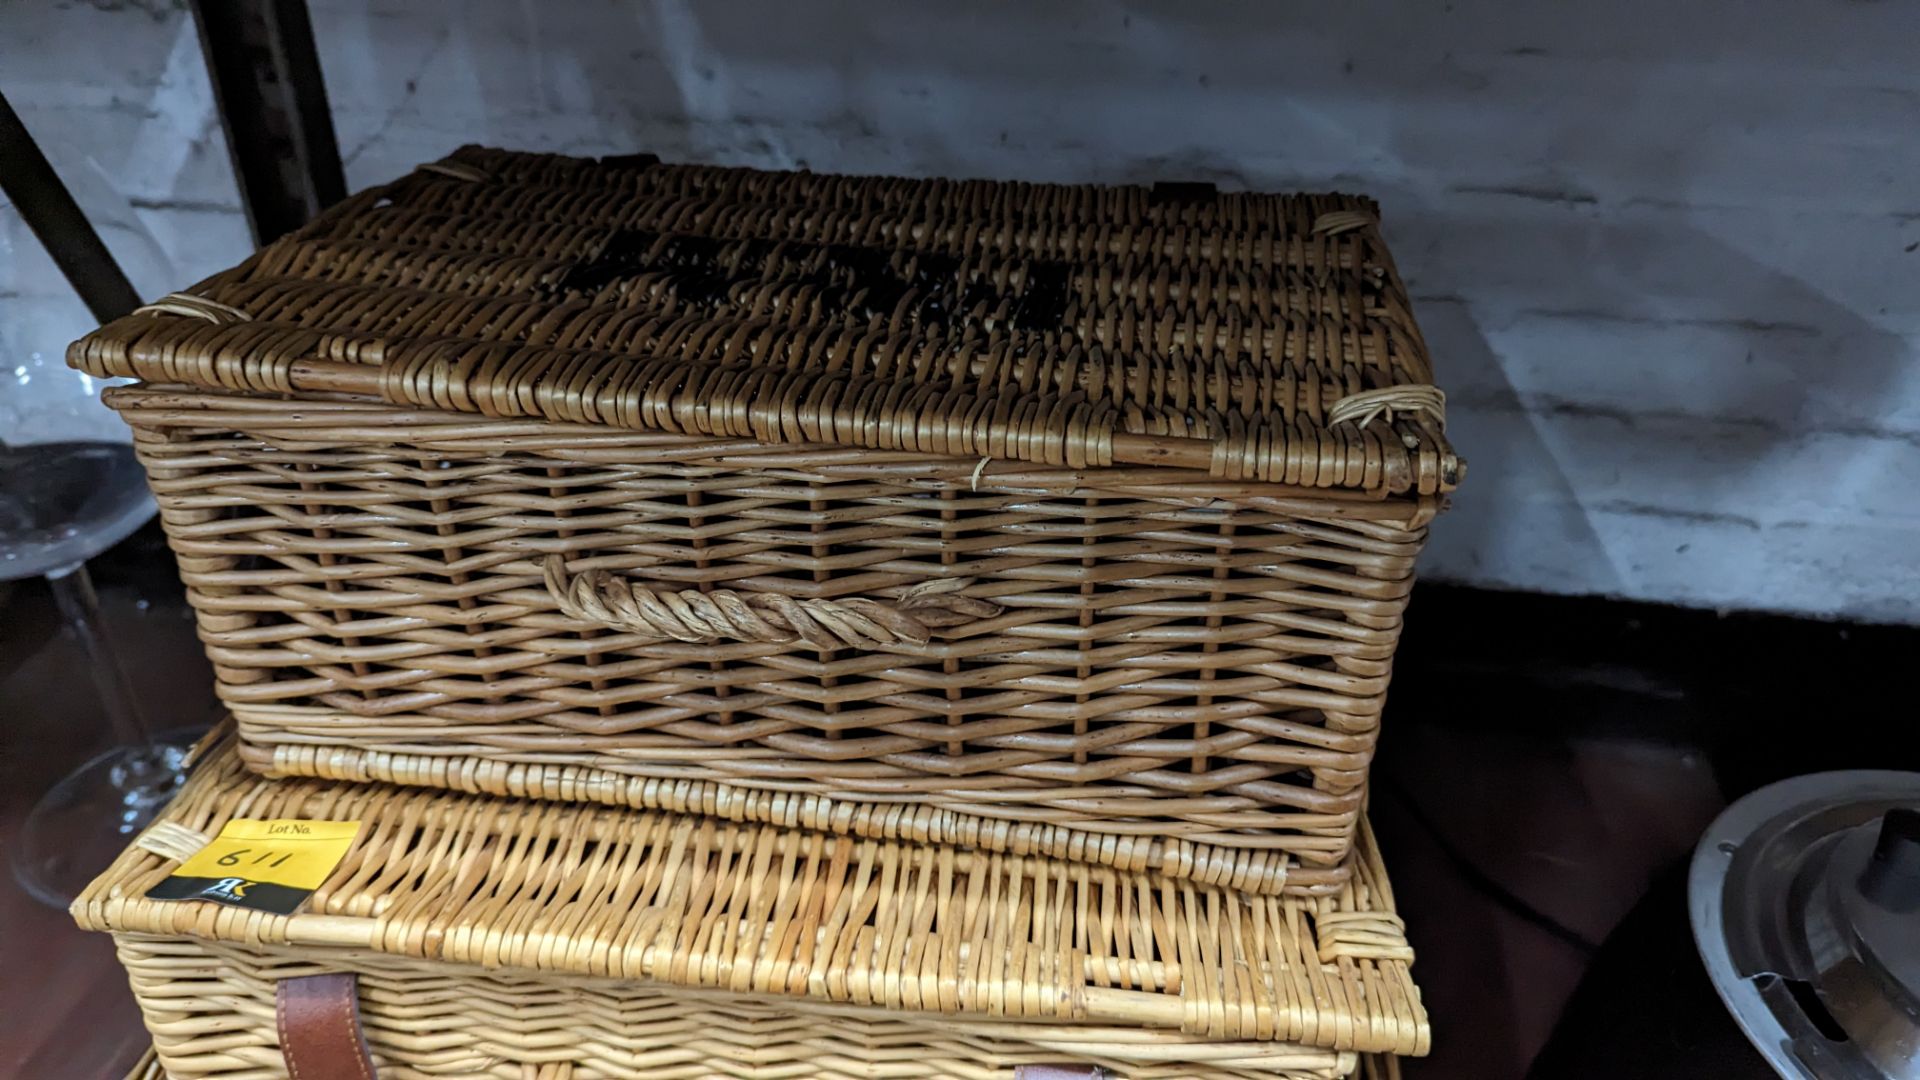 3 off assorted size picnic baskets - Image 3 of 5